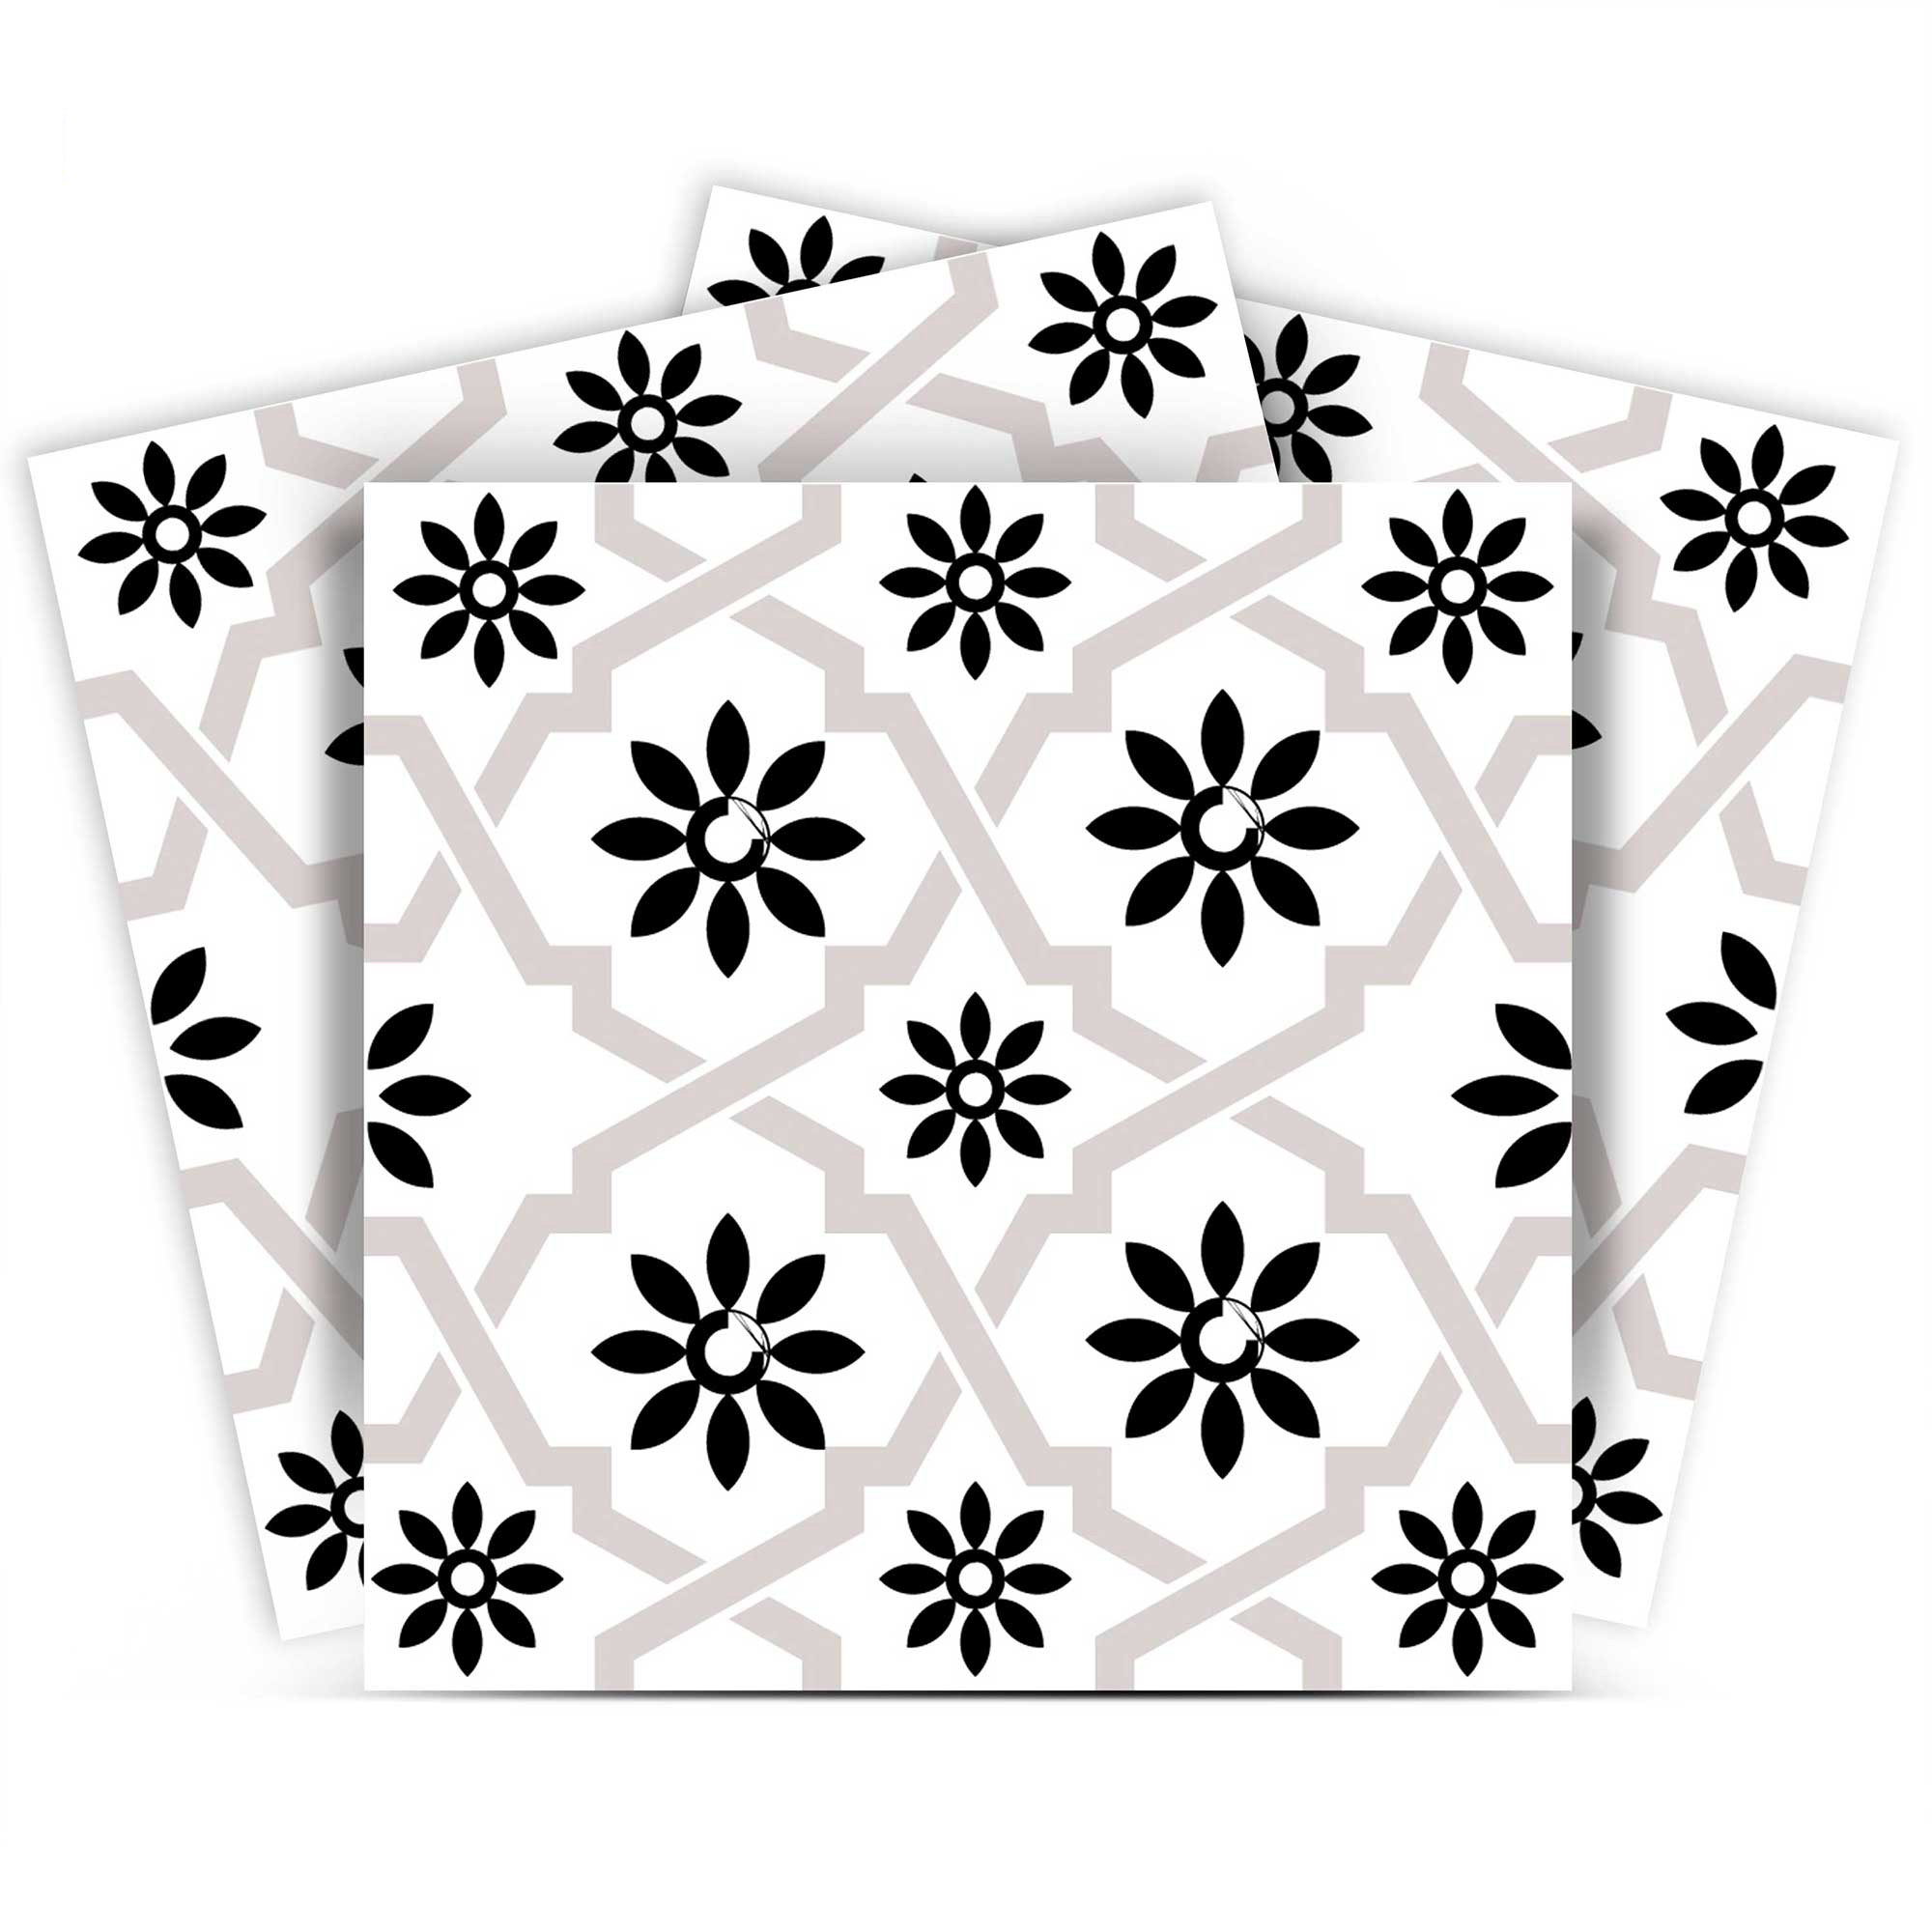 7" X 7" Black and White Lil  Daisy Peel and Stick Removable Tiles-399908-1